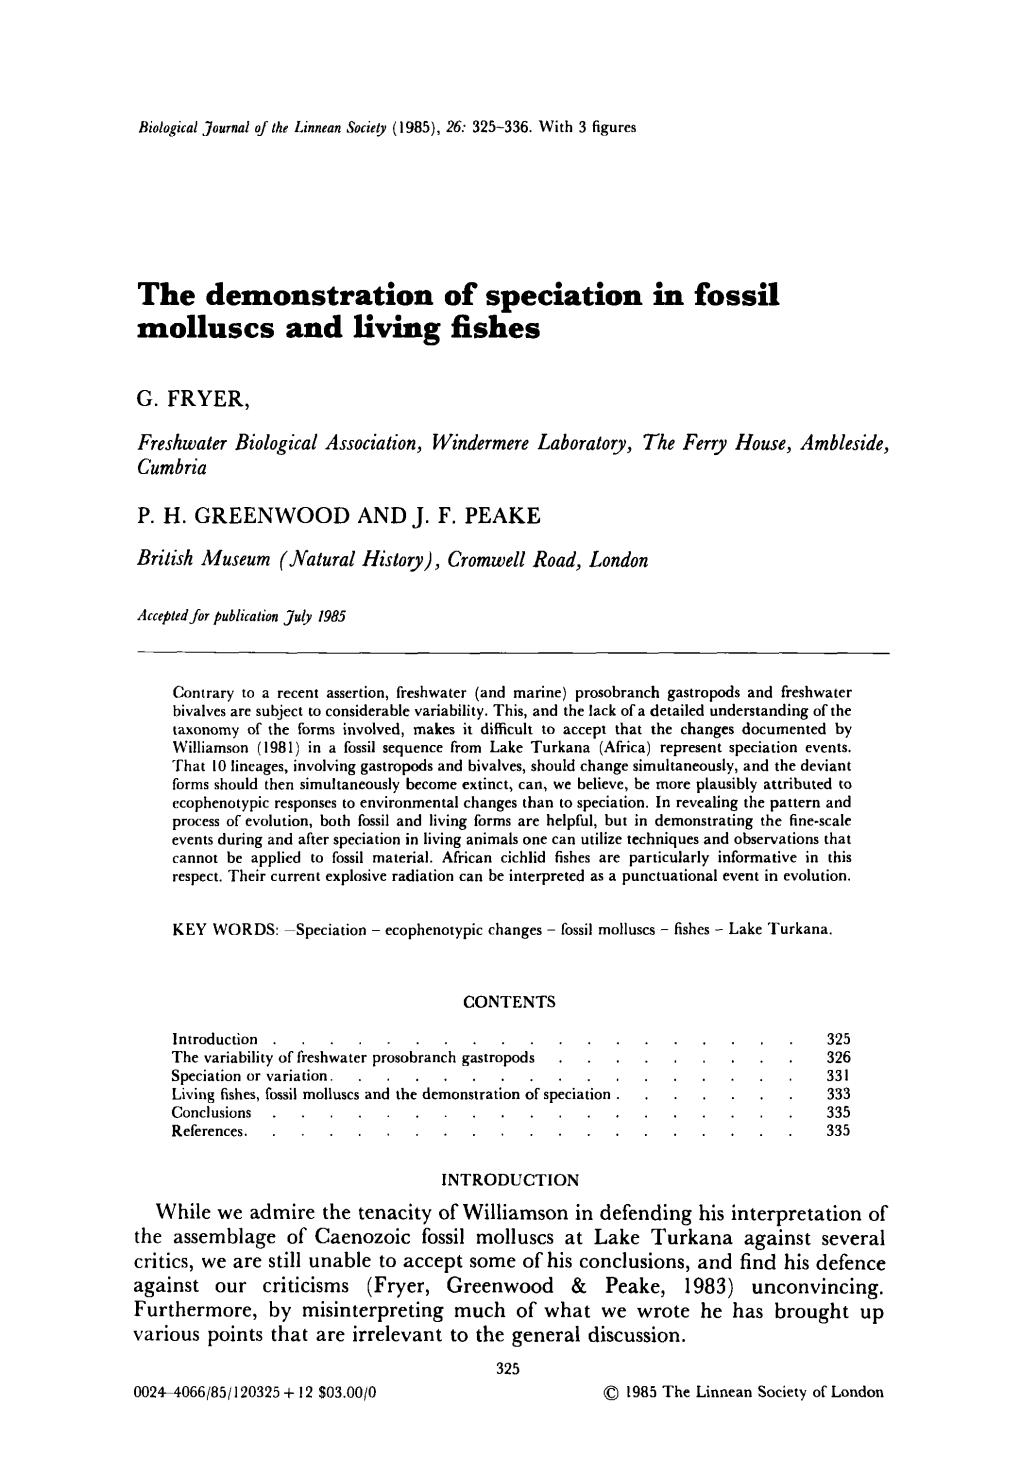 The Demonstration of Speciation in Fossil Molluscs and Living Fishes